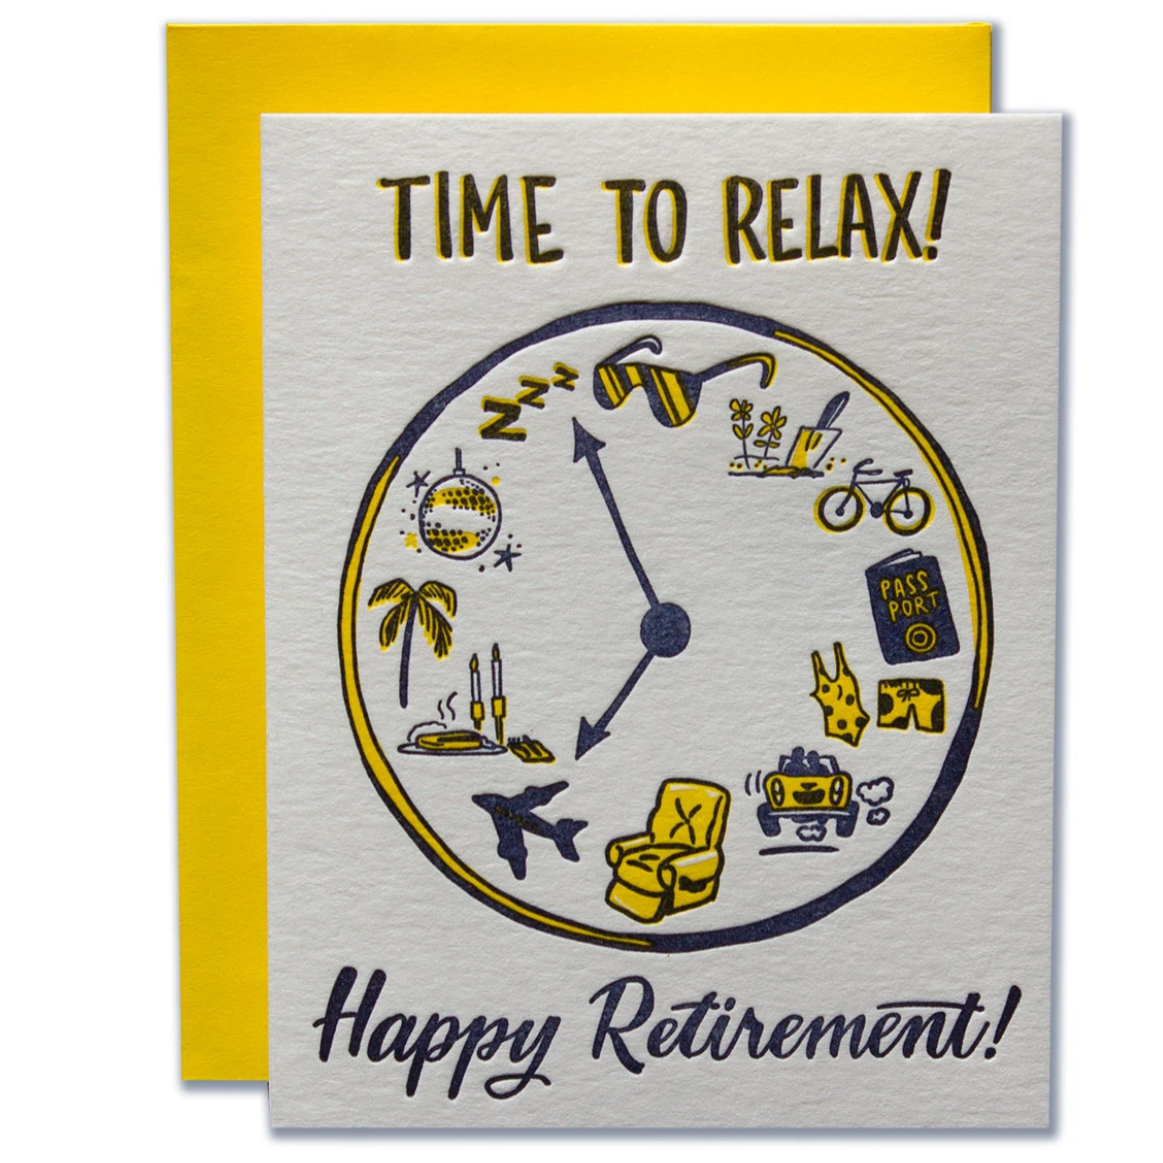 card with clock and instead of numbers it has things like a comfy chair, airplane and bathing suit. It reads "Time to Relax! Happy Retirement!"